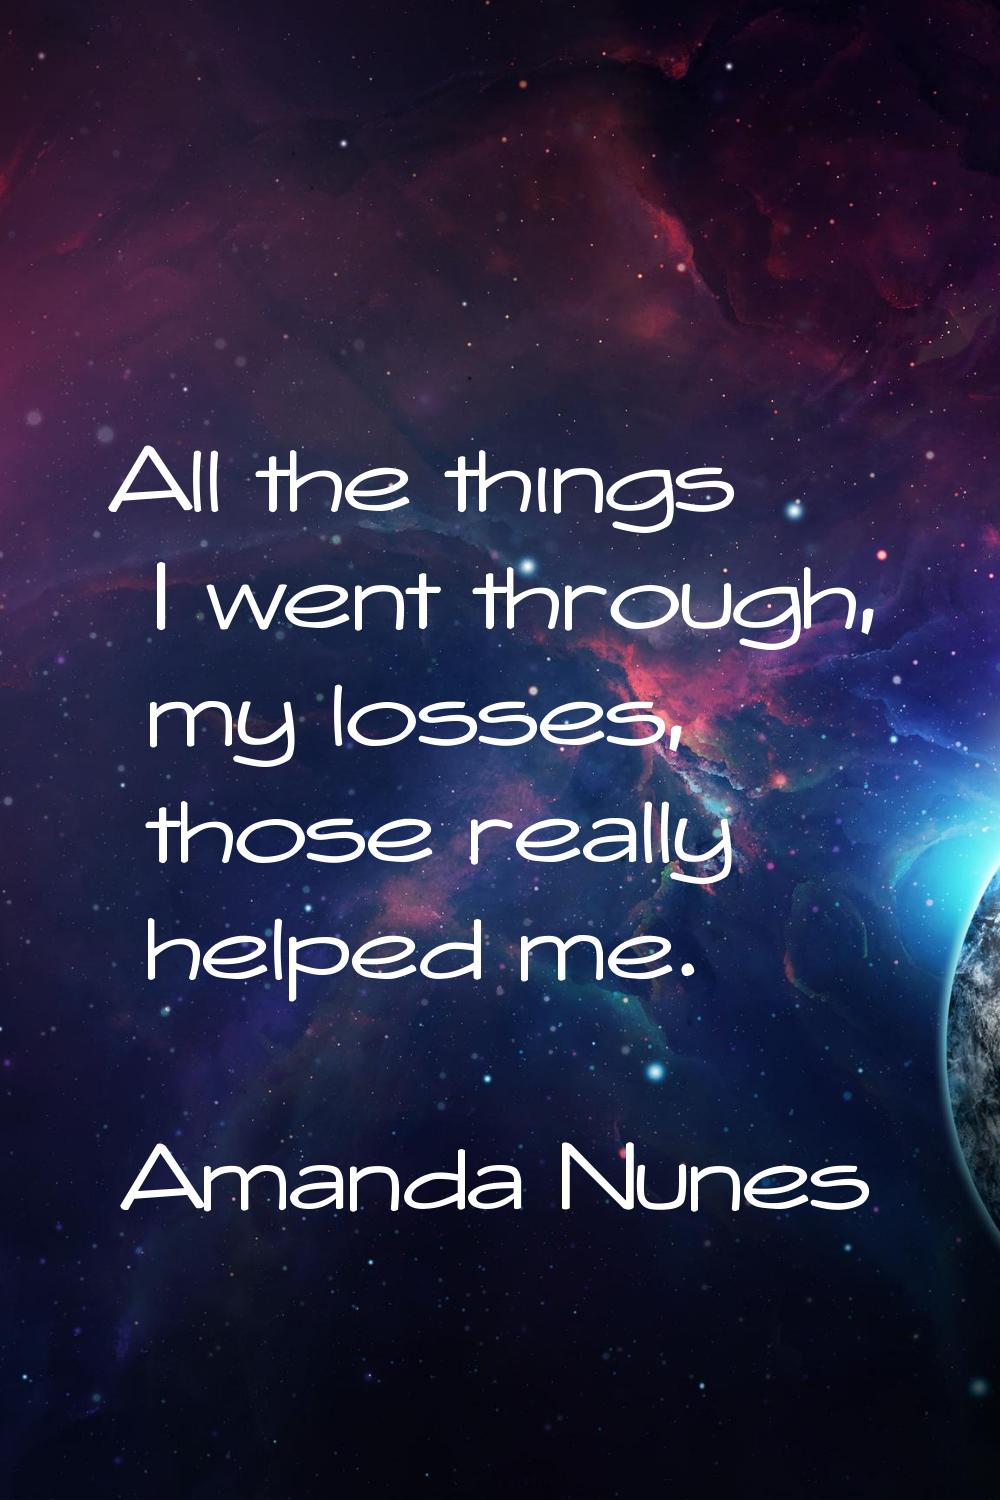 All the things I went through, my losses, those really helped me.